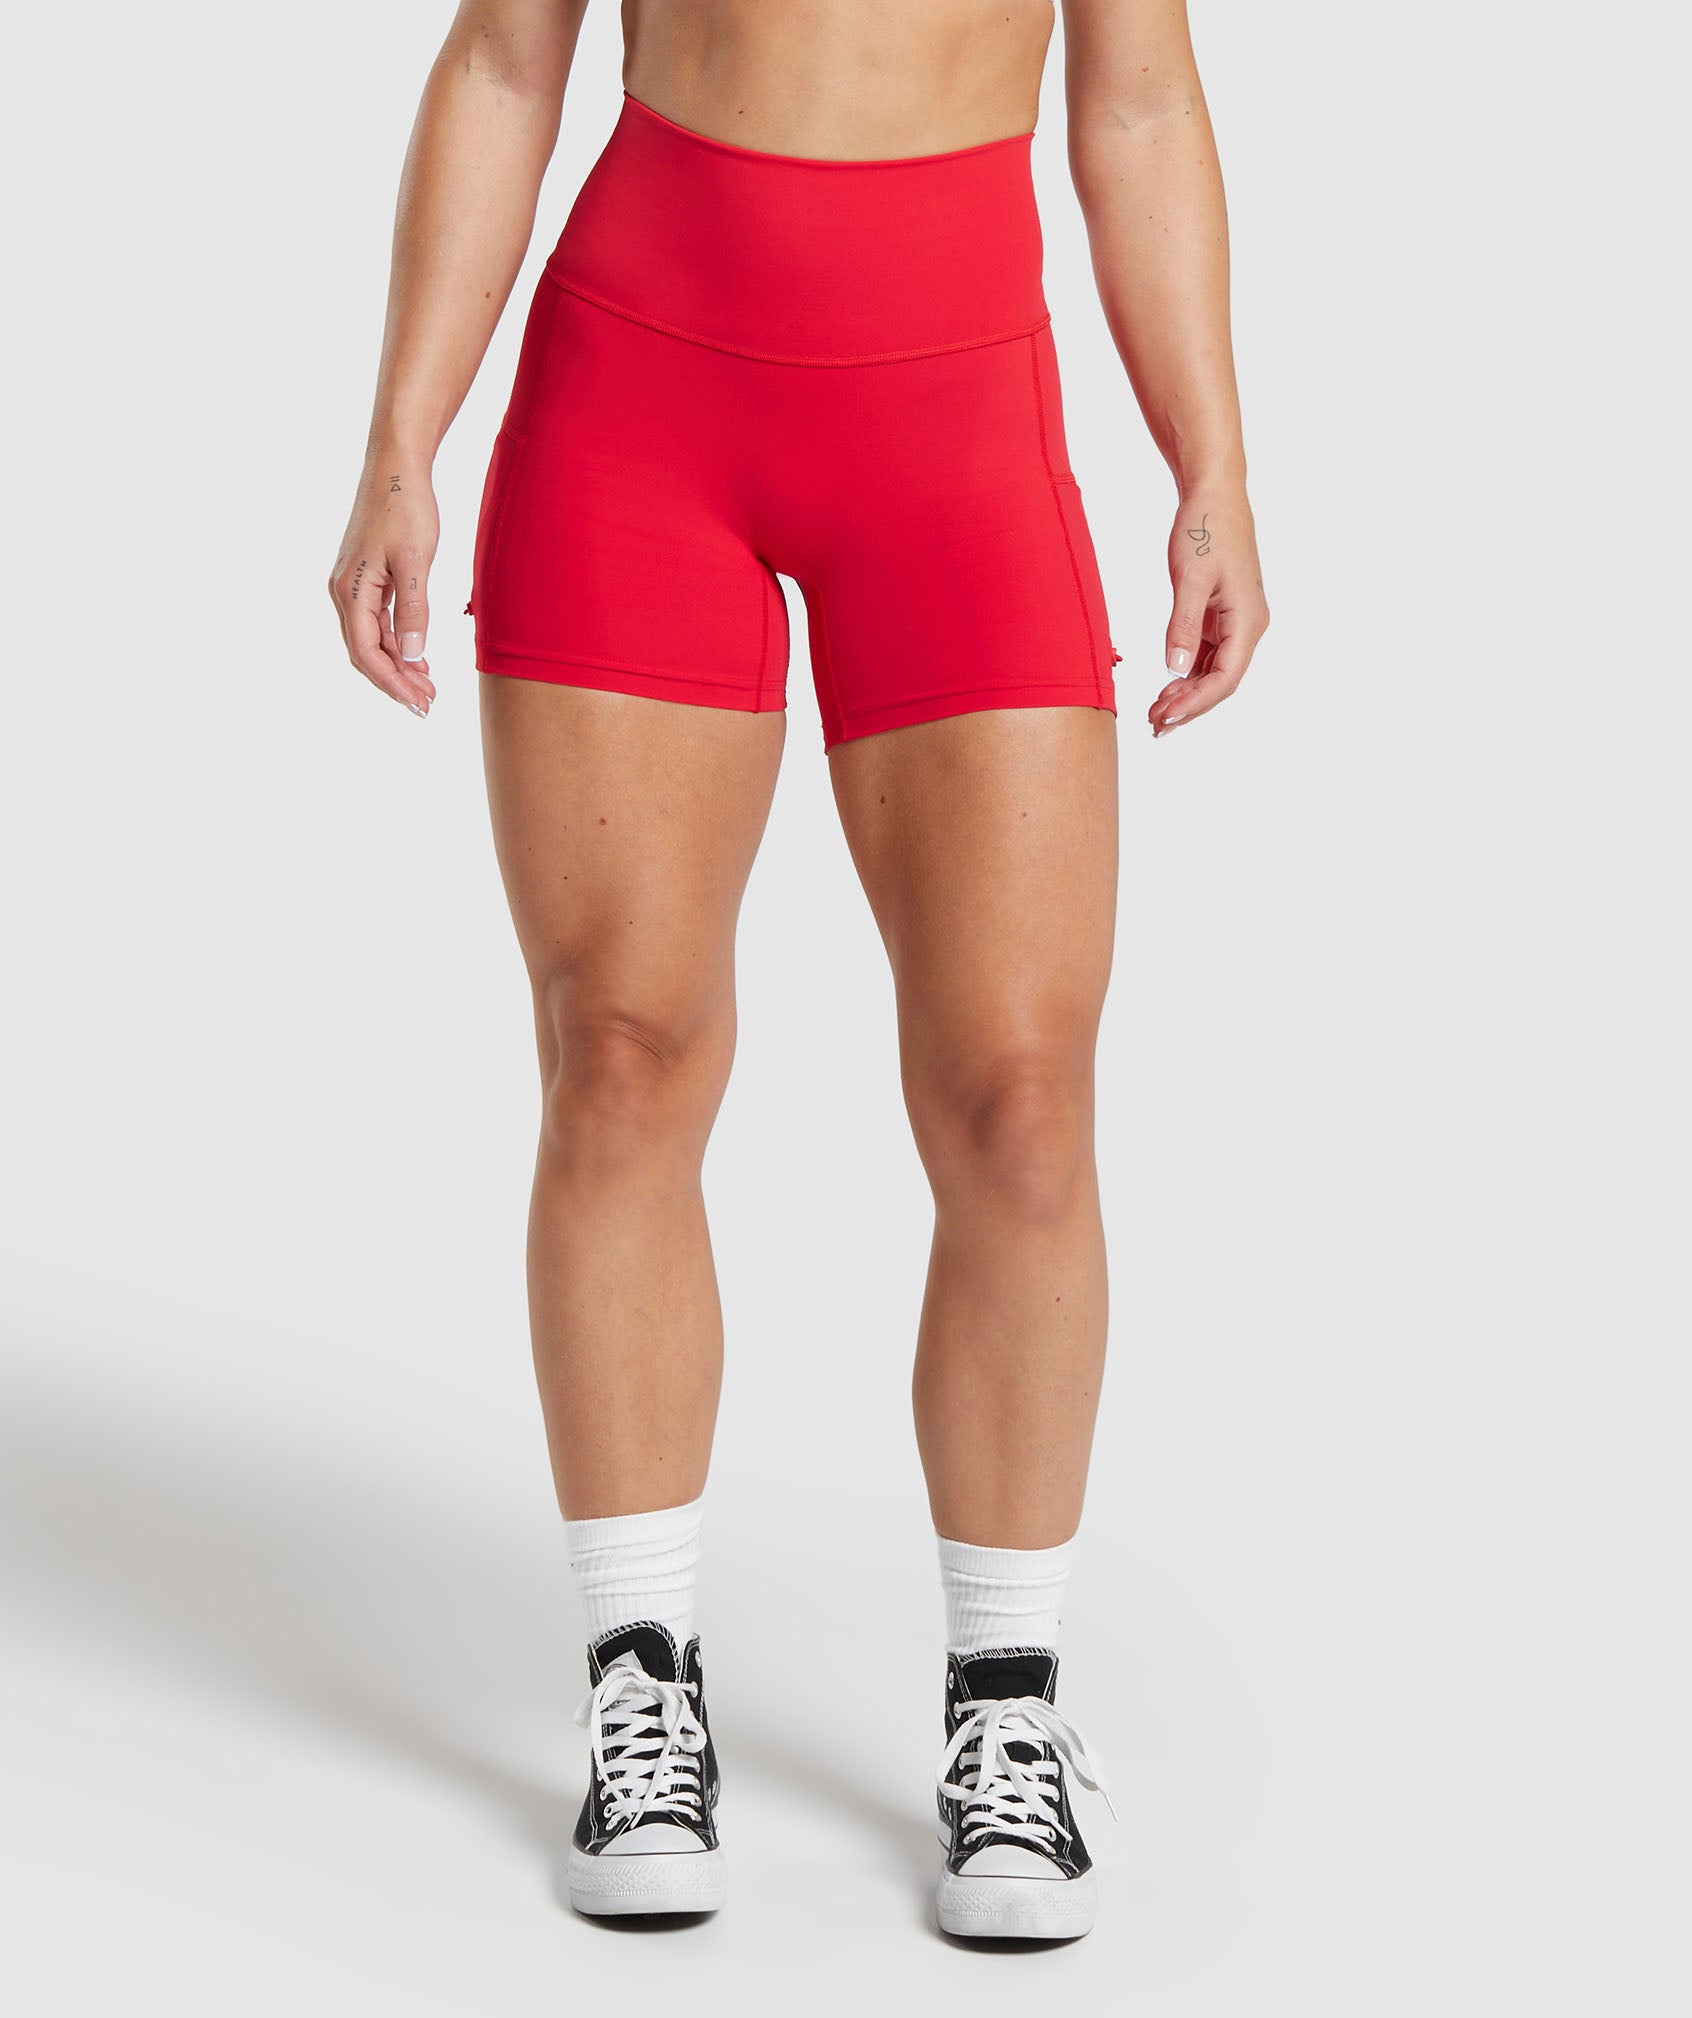 Legacy Tight Shorts in Jamz Red - view 1